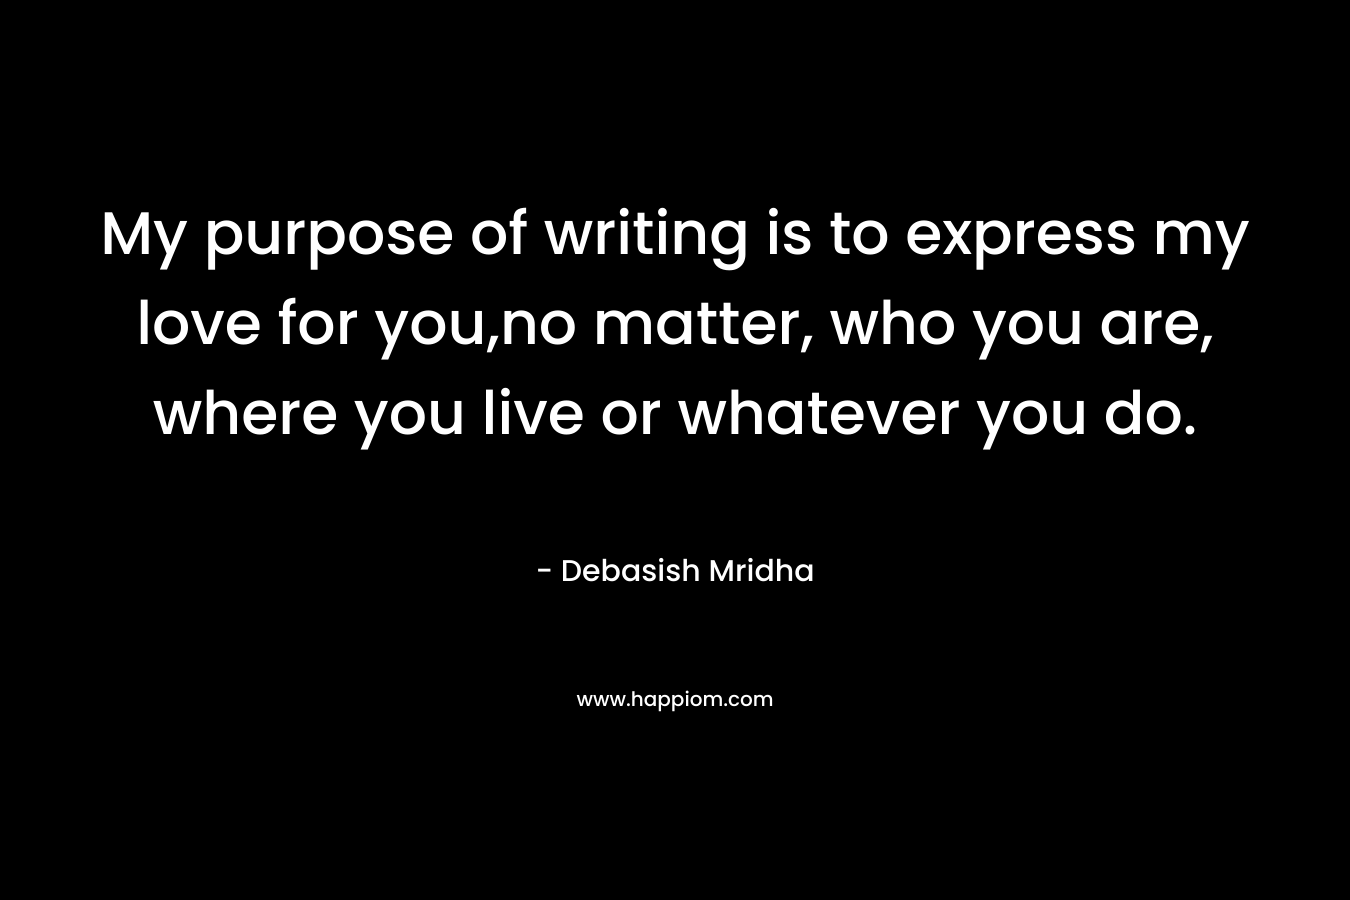 My purpose of writing is to express my love for you,no matter, who you are, where you live or whatever you do. – Debasish Mridha